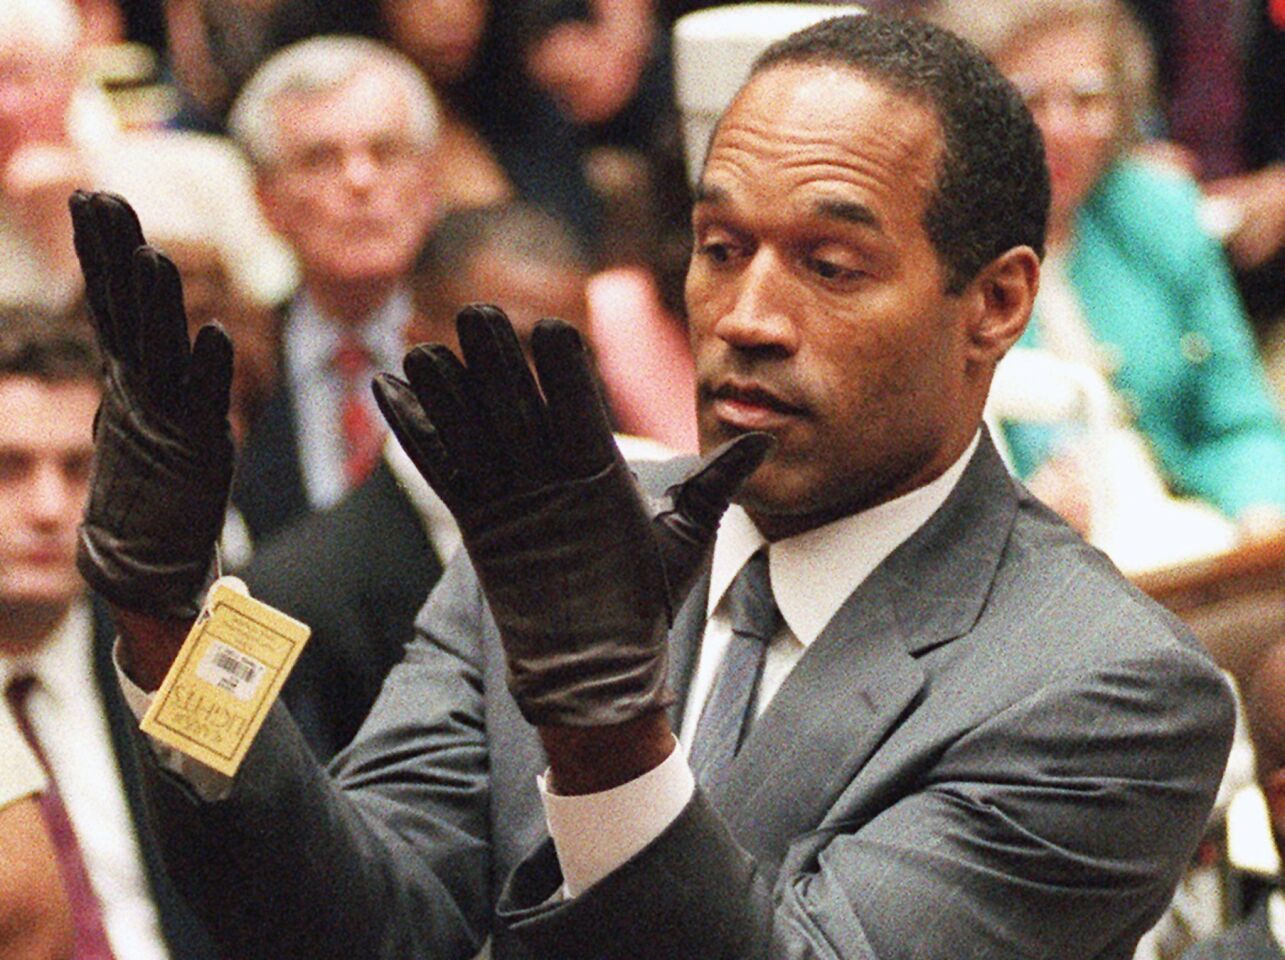 Showing gloved hands to the jury